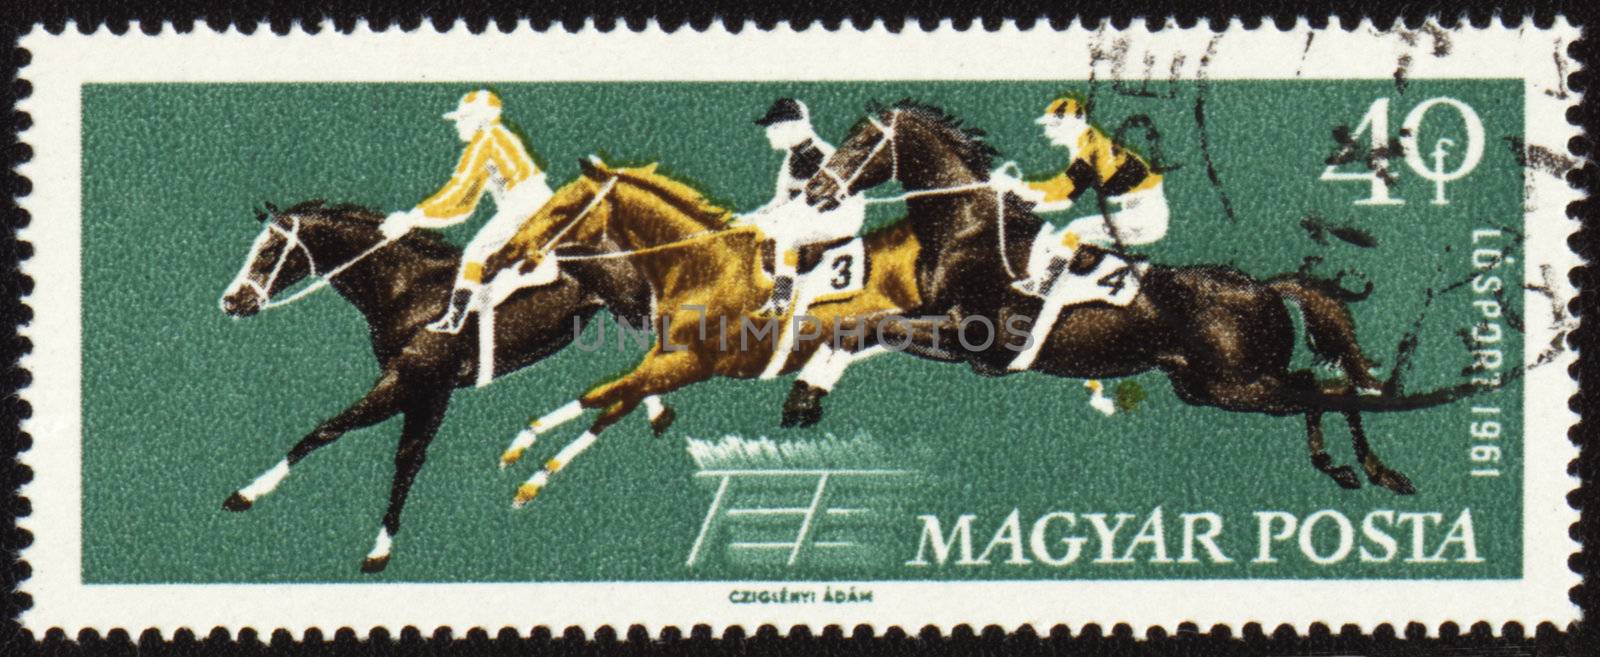 Jumping show on post stamp by wander